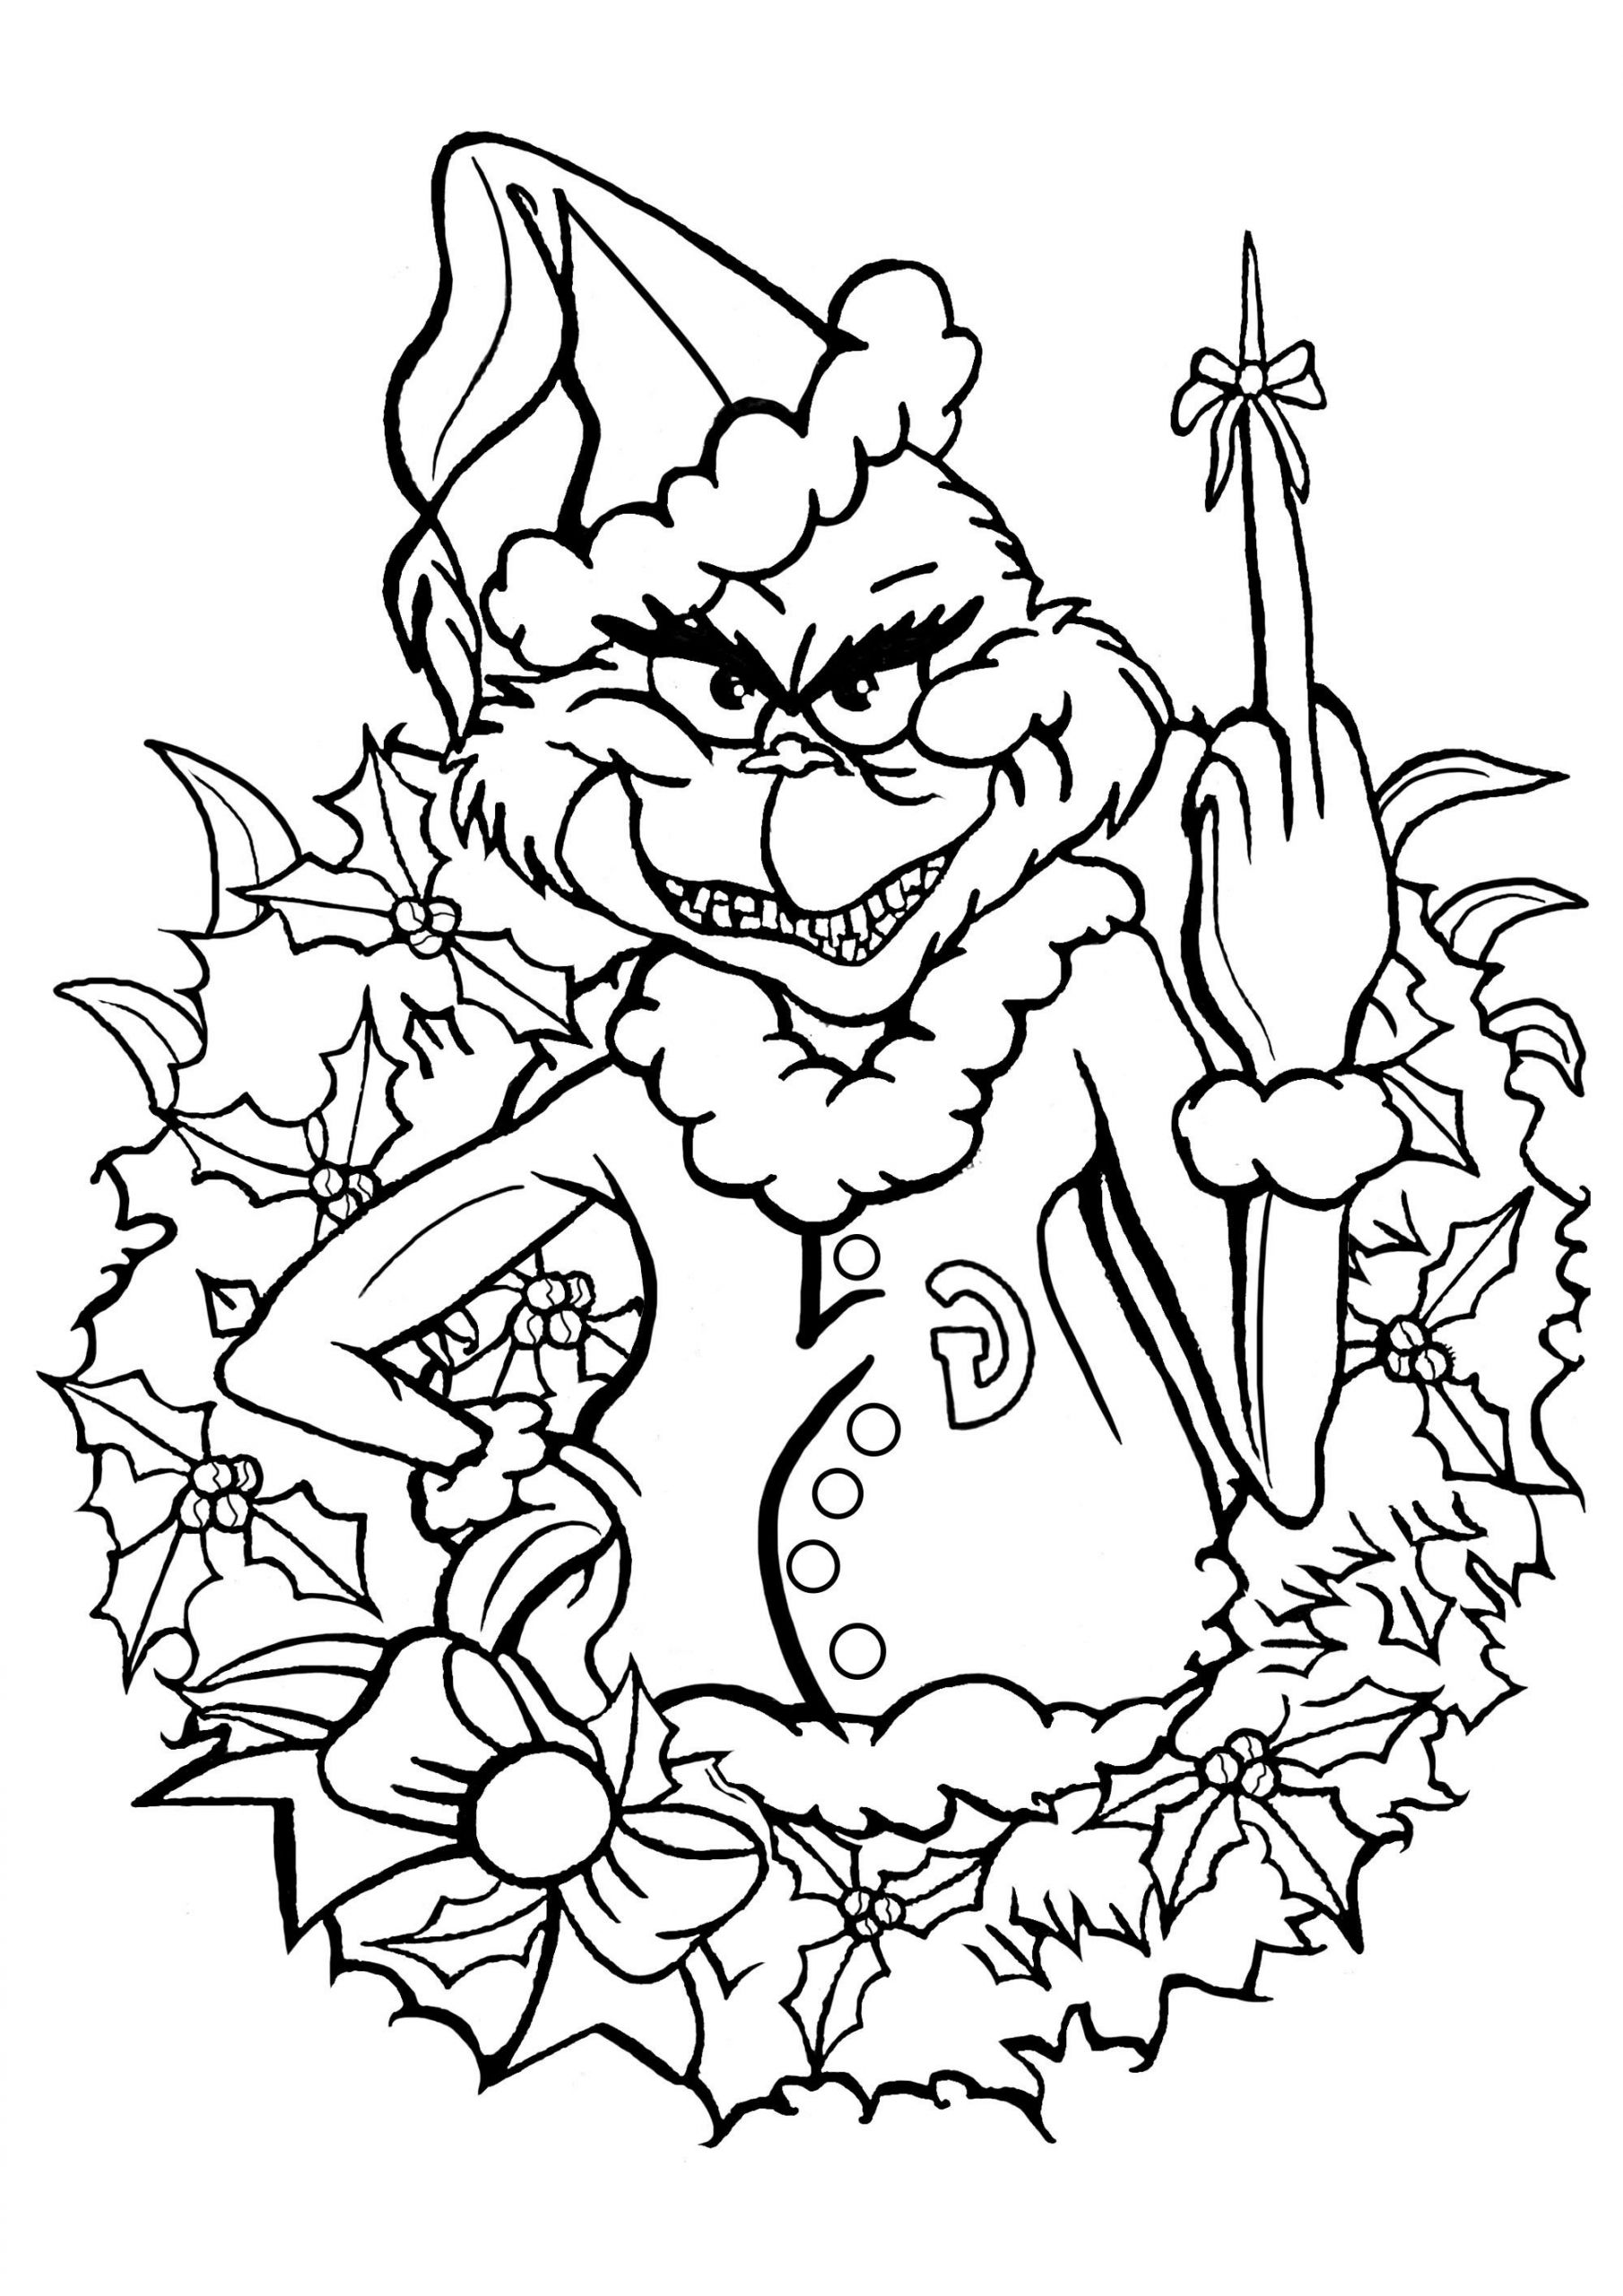 Printable Grinch Coloring Pages
 The Grinch The Grinch Kids Coloring Pages